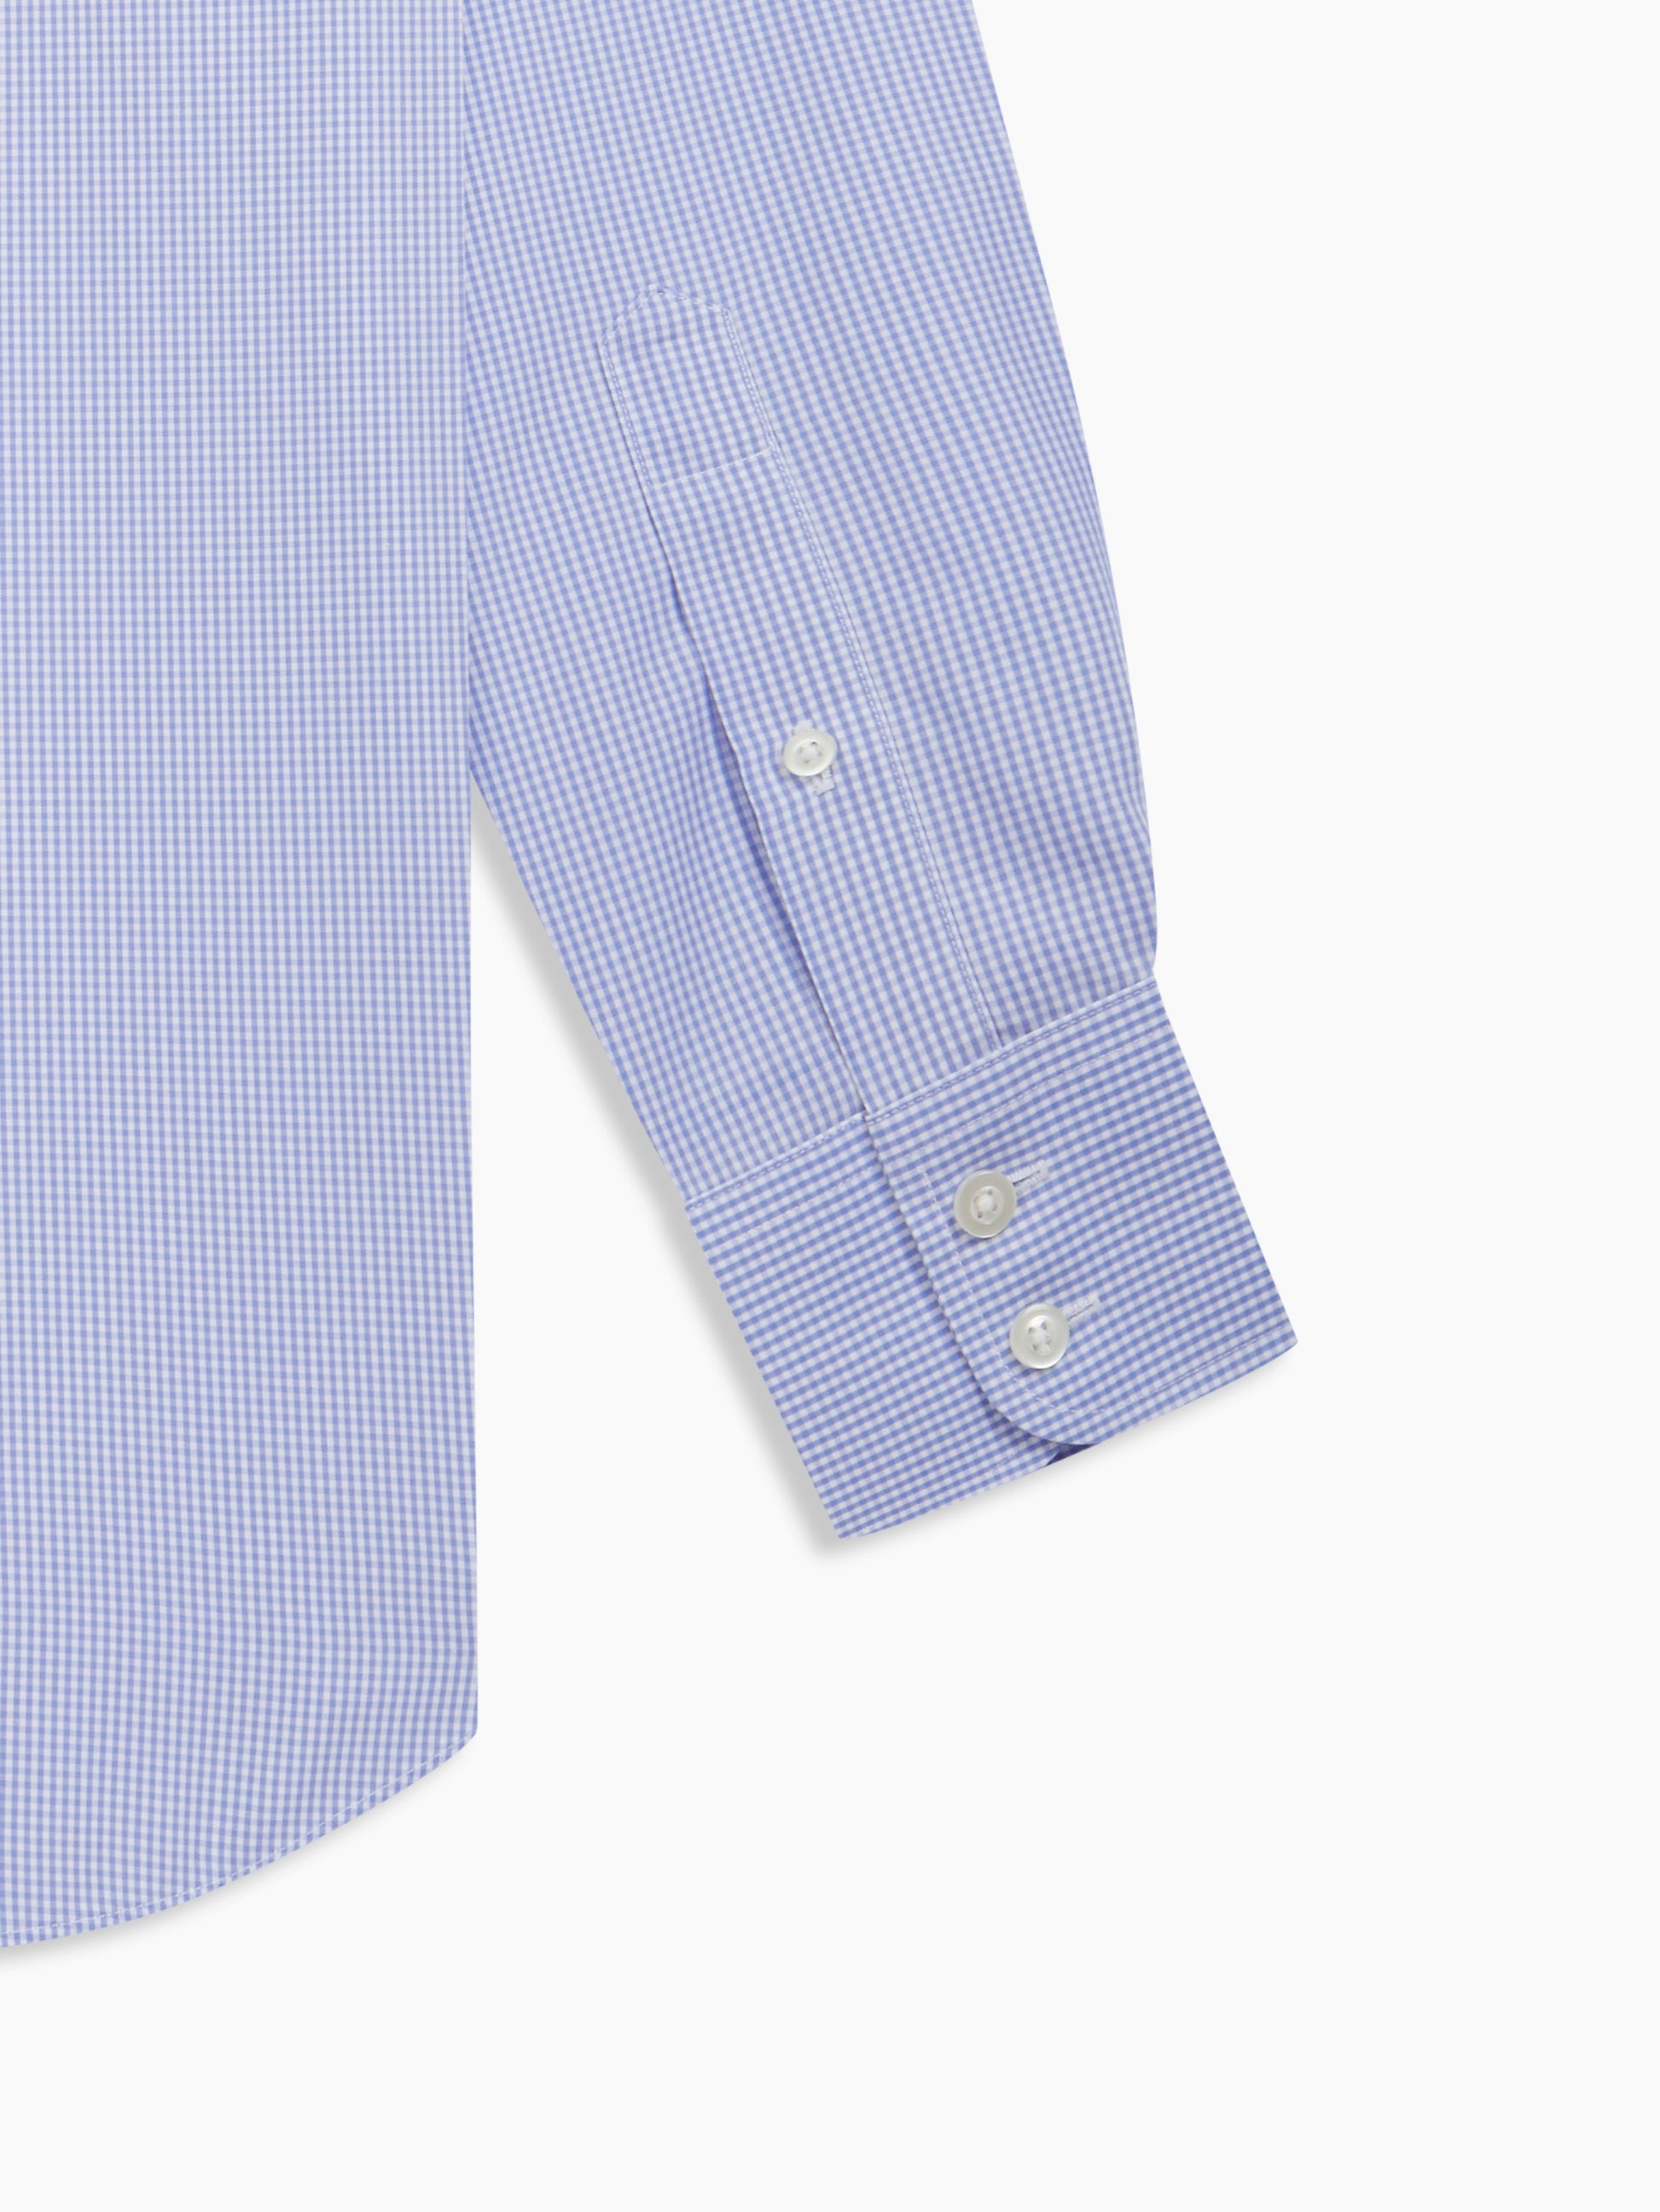 Image 3 of Non-Iron Light Blue Gingham Dobby Fitted Single Cuff Classic Collar Shirt